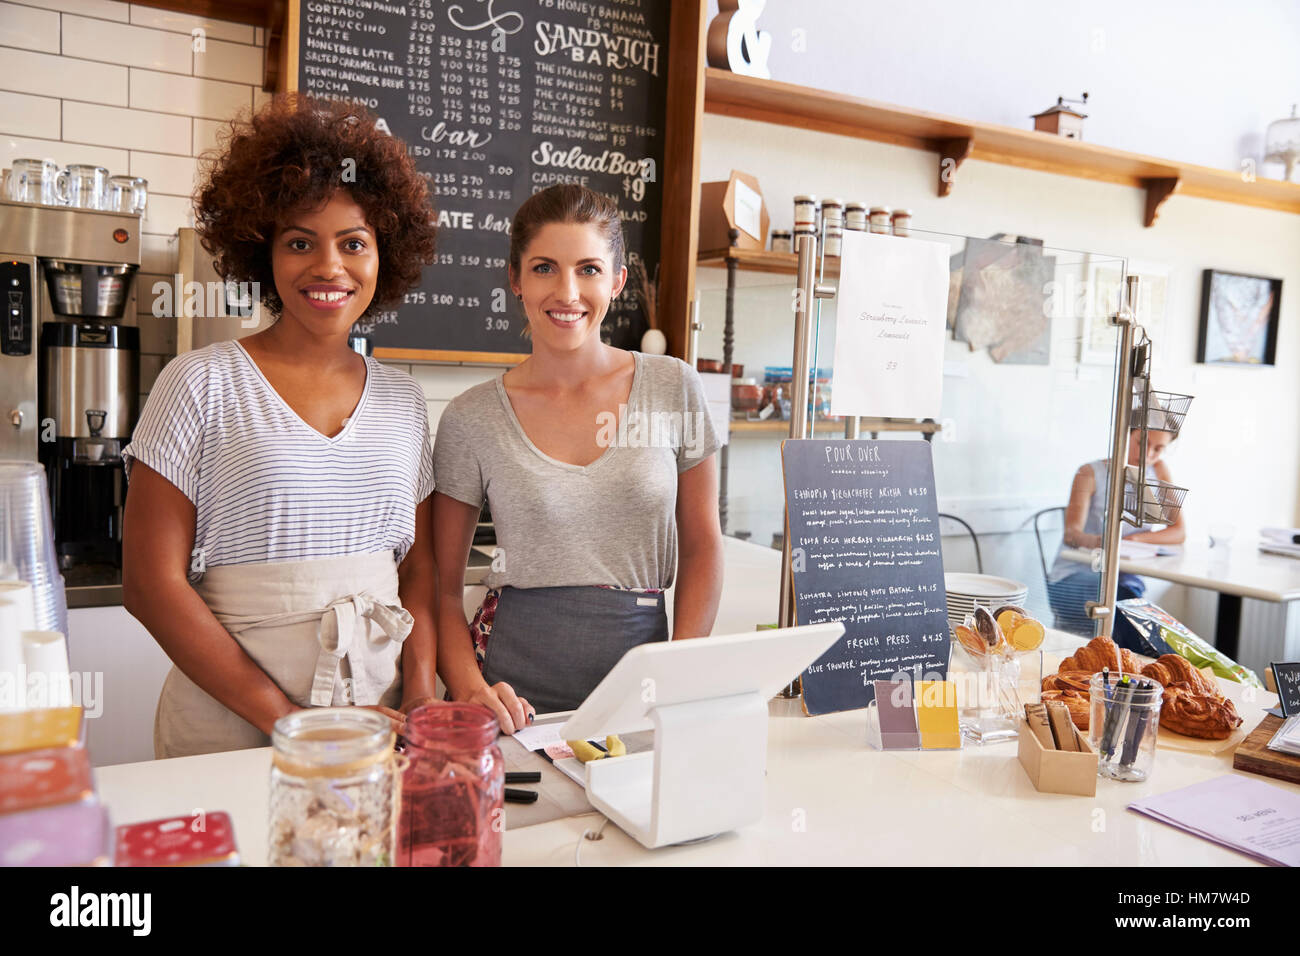 Woman Behind The Counter Of Sandwich Bar Looking To Camera Stock Photo,  Picture and Royalty Free Image. Image 71213517.